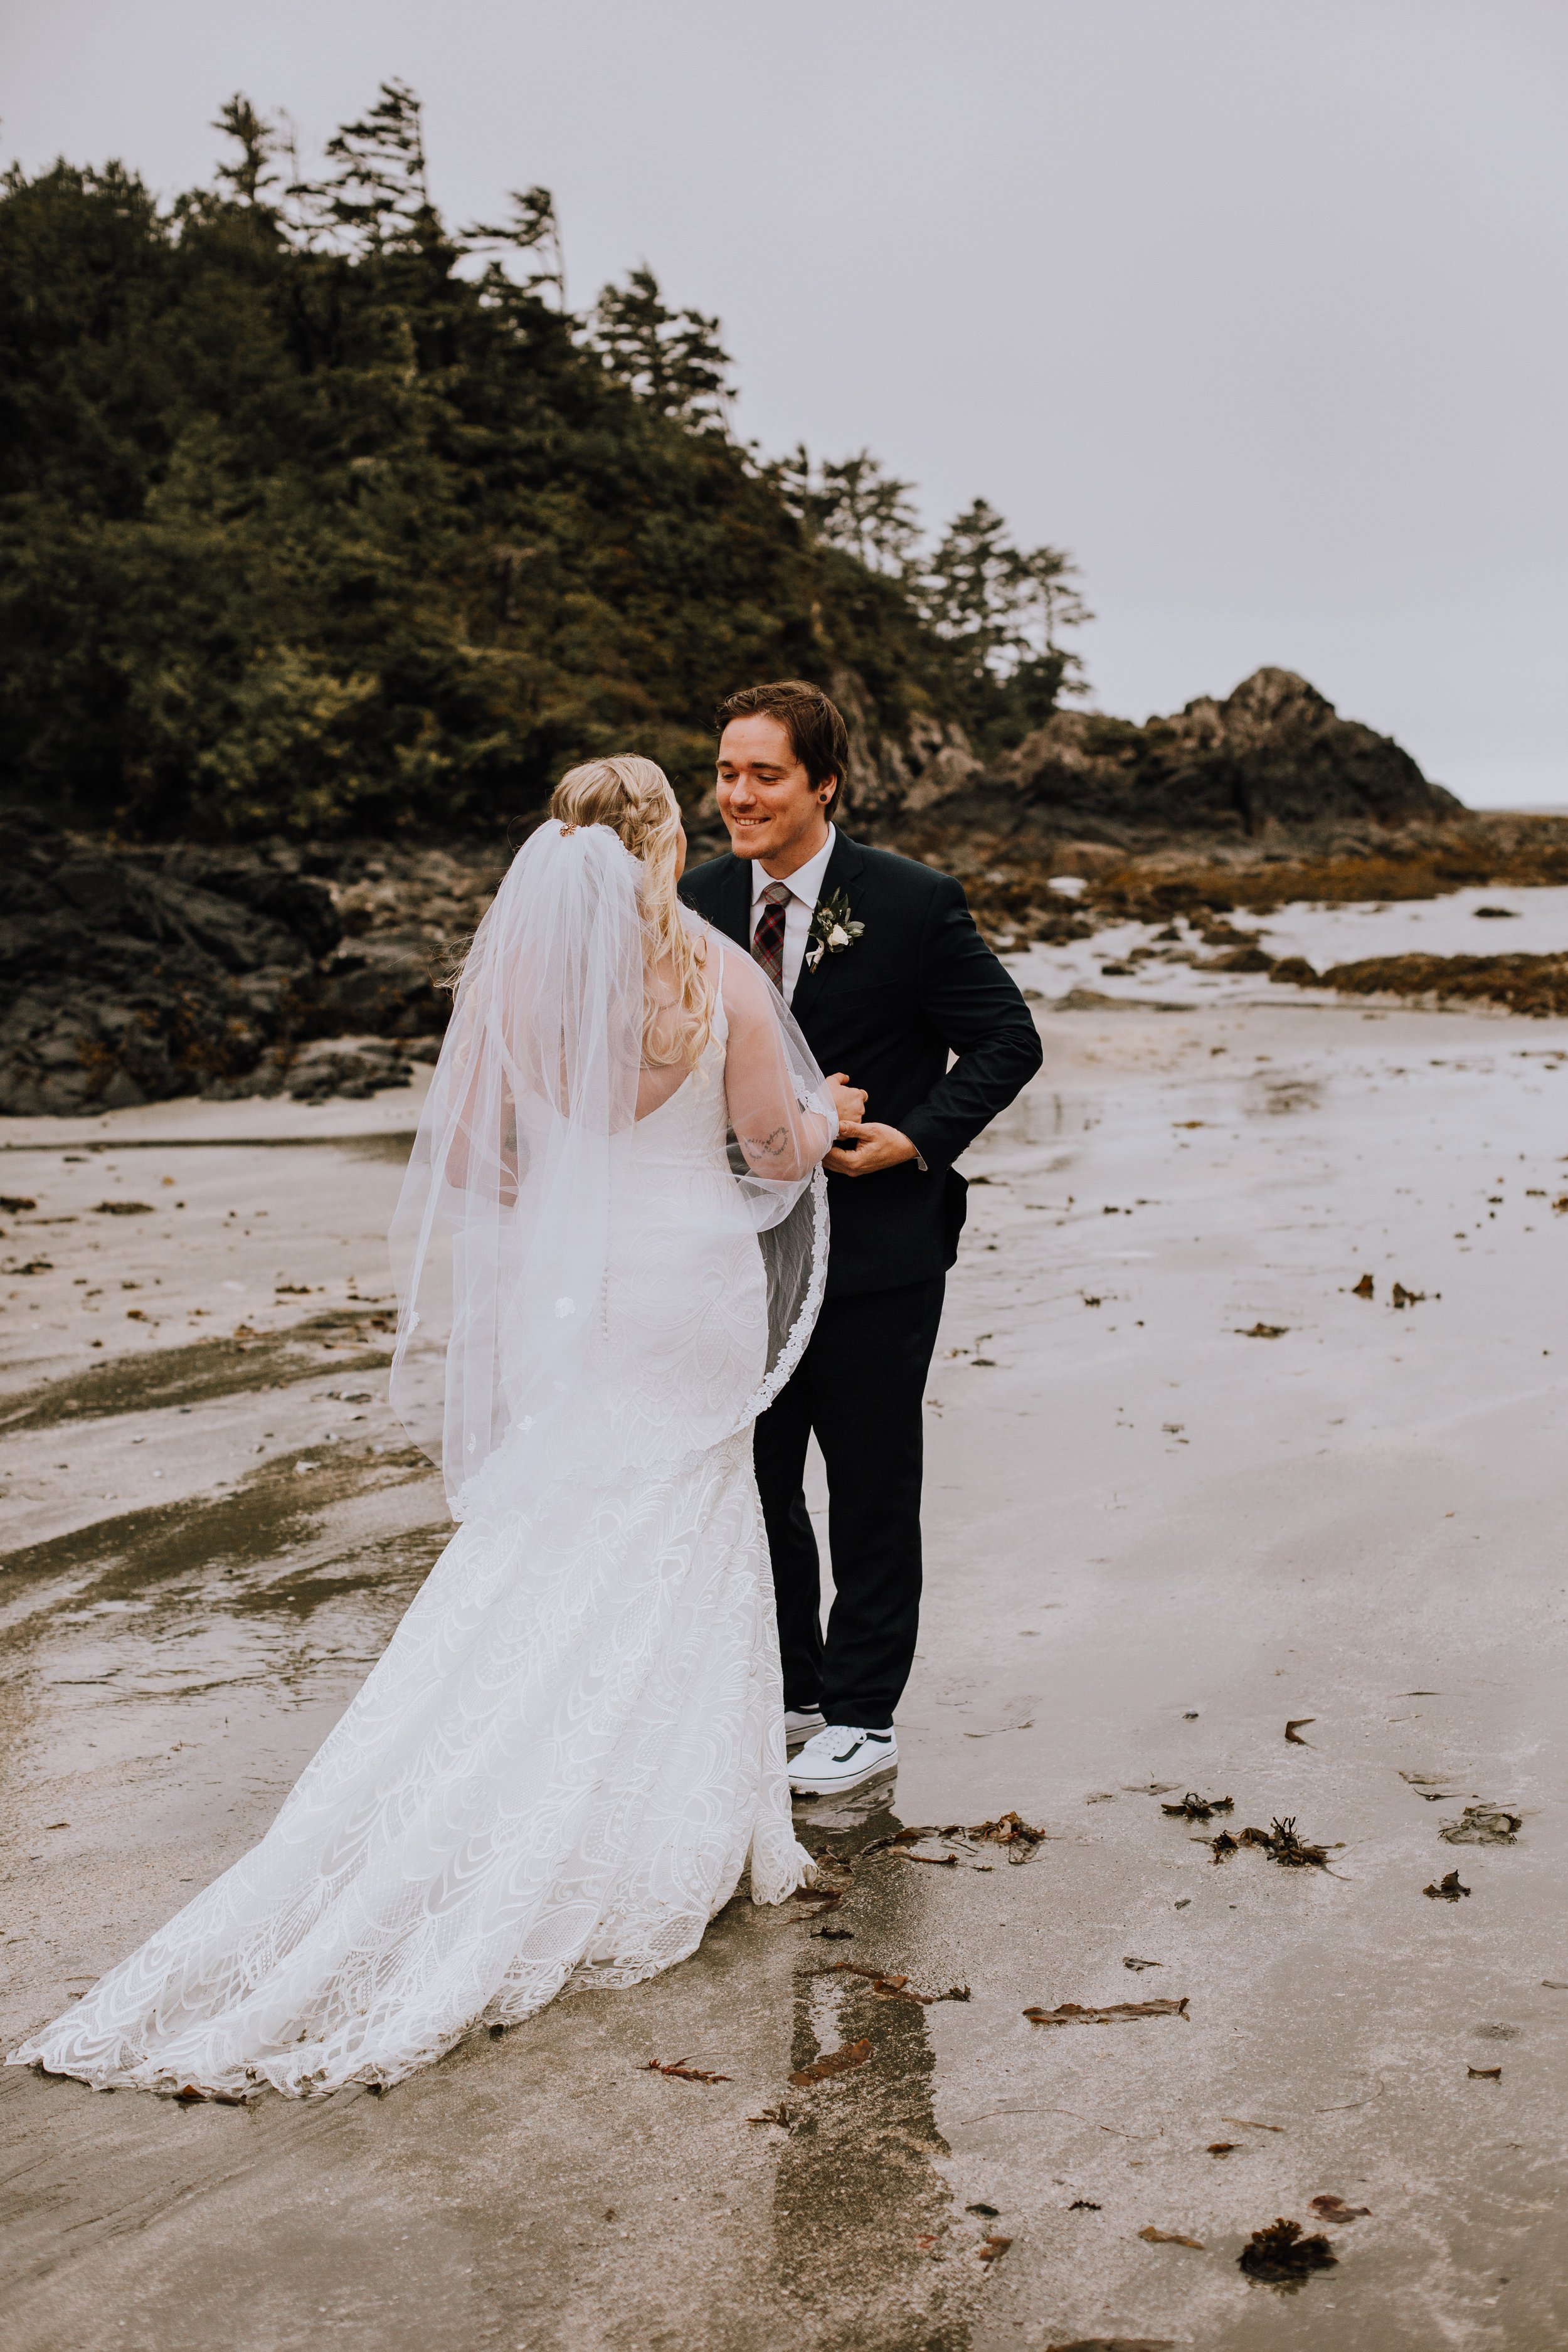 Brooke and Devin Wedding - Tin Wis Best Western Tofino Vancouver Island British Columbia - Elyse Anna Photography-1666.jpg